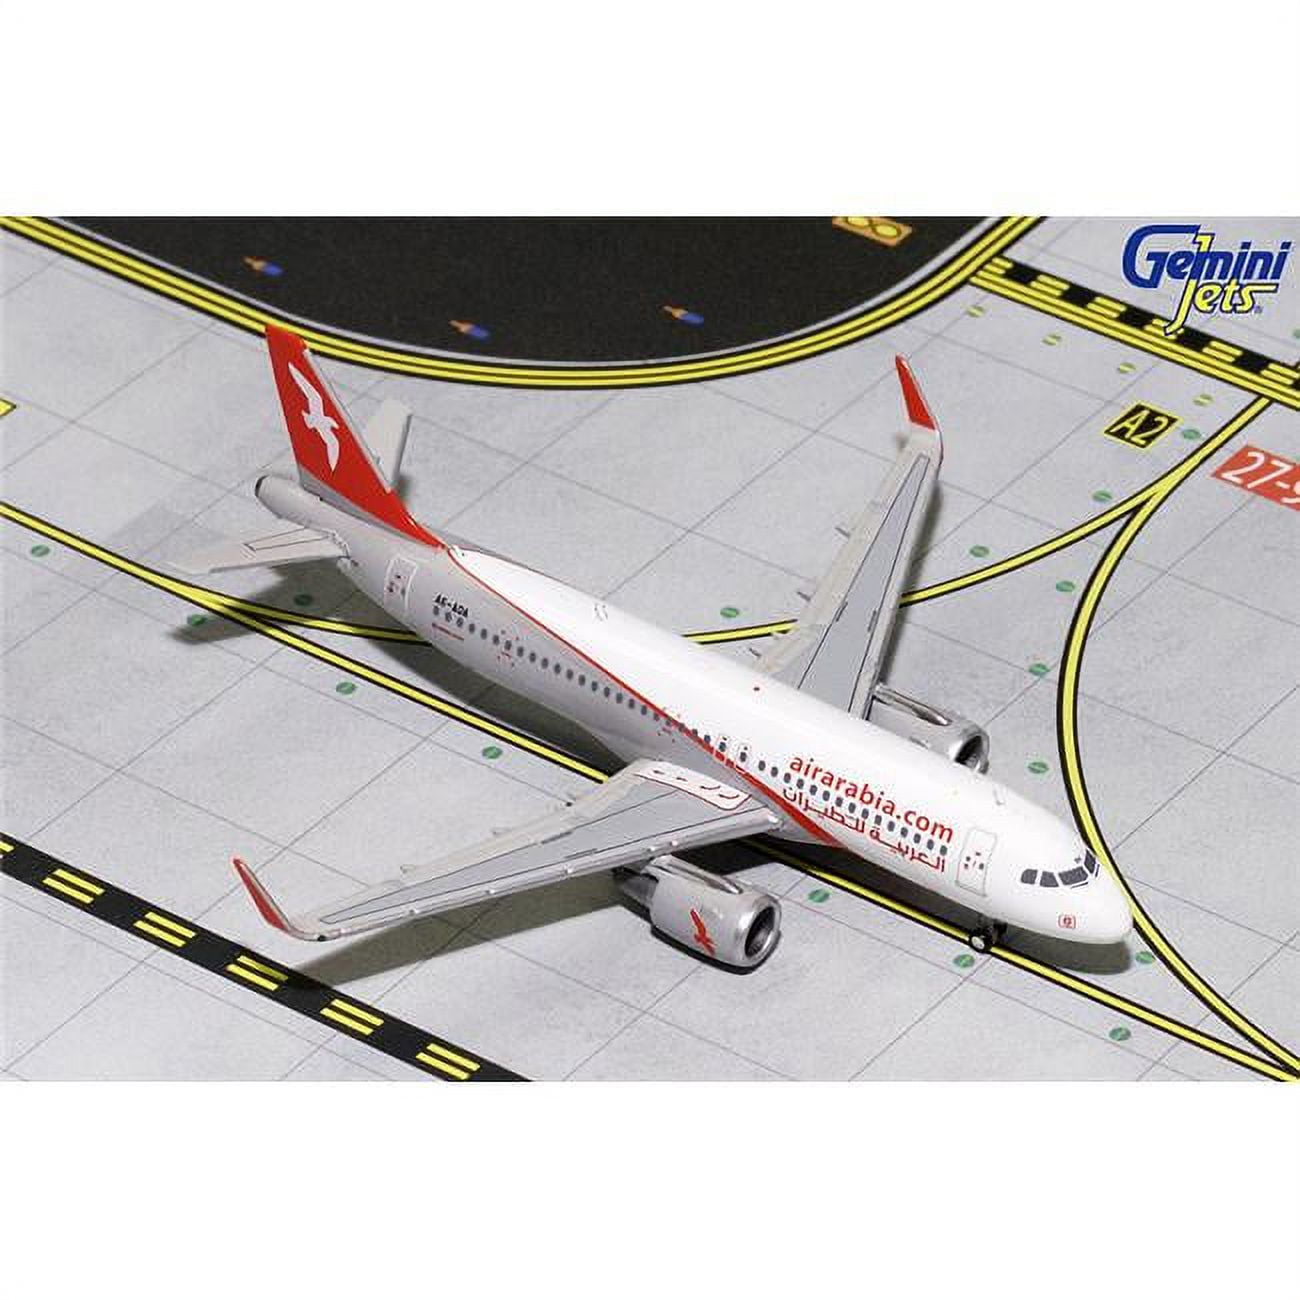 Gemini Jets Gj1436 No. A6-aoa A320 Diecast Model Air Arabia Airlines With Scale 1 By 400